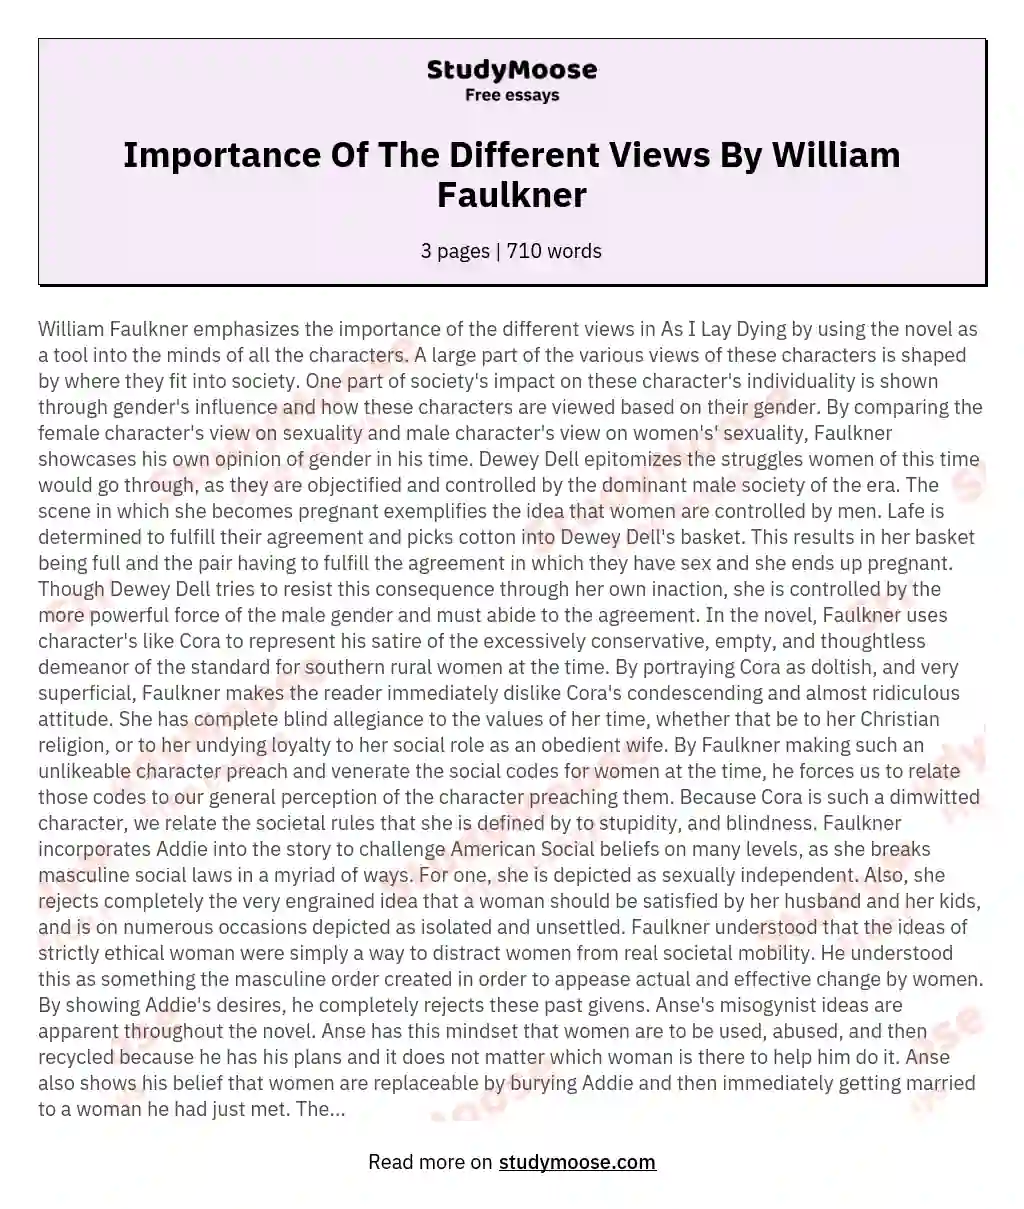 Importance Of The Different Views By William Faulkner